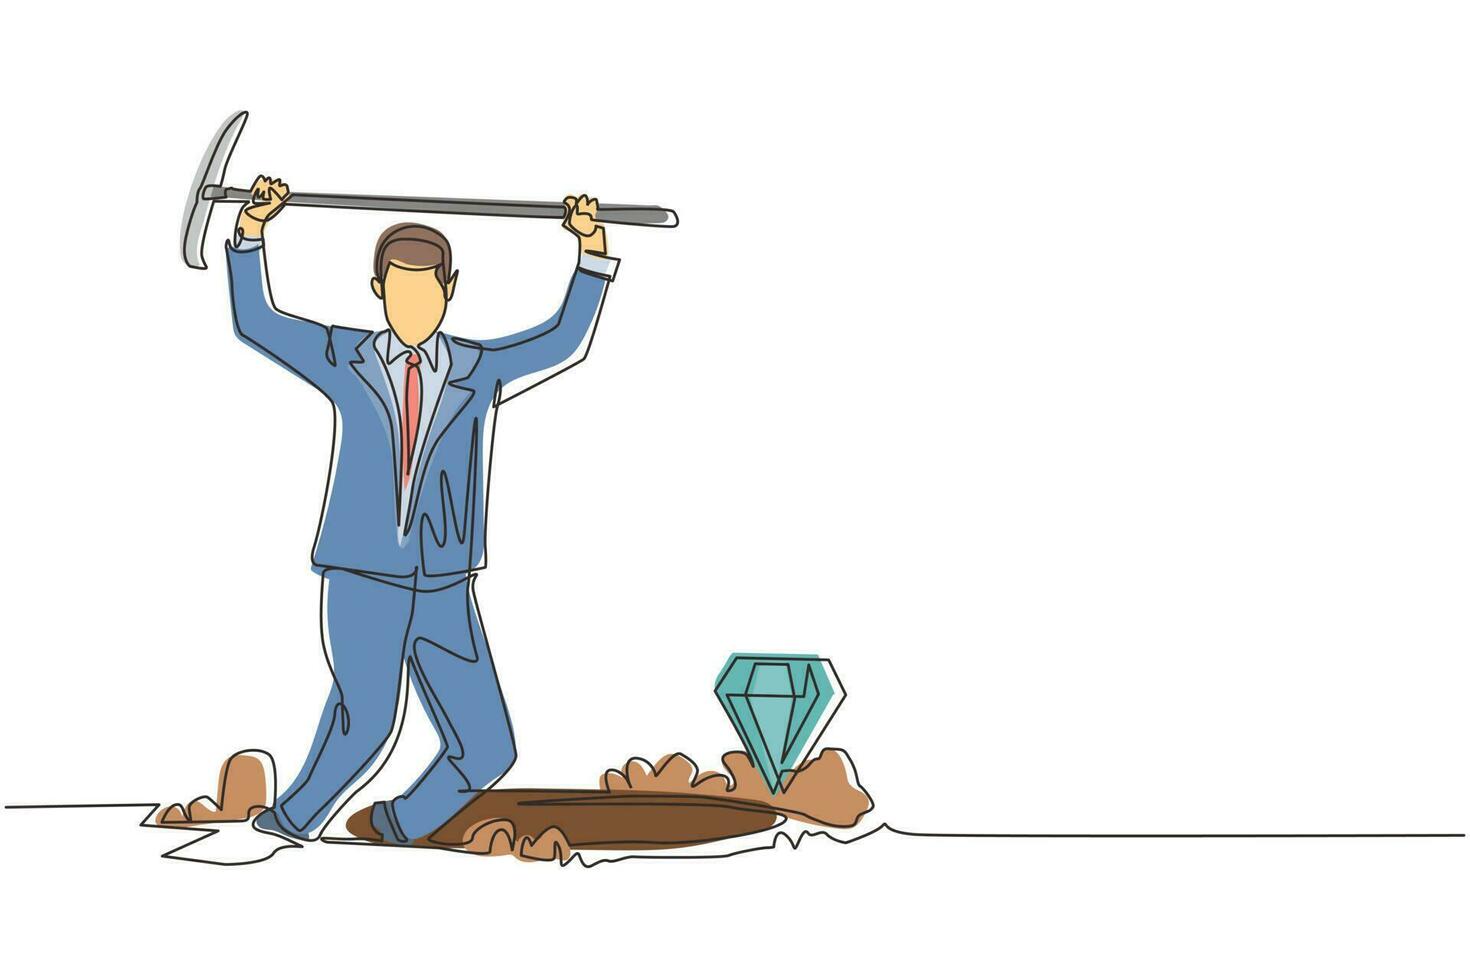 Continuous one line drawing young businessman in hole prancing happily while lifting pickaxe with both hands and finding diamond or precious stone. Single line draw design vector graphic illustration